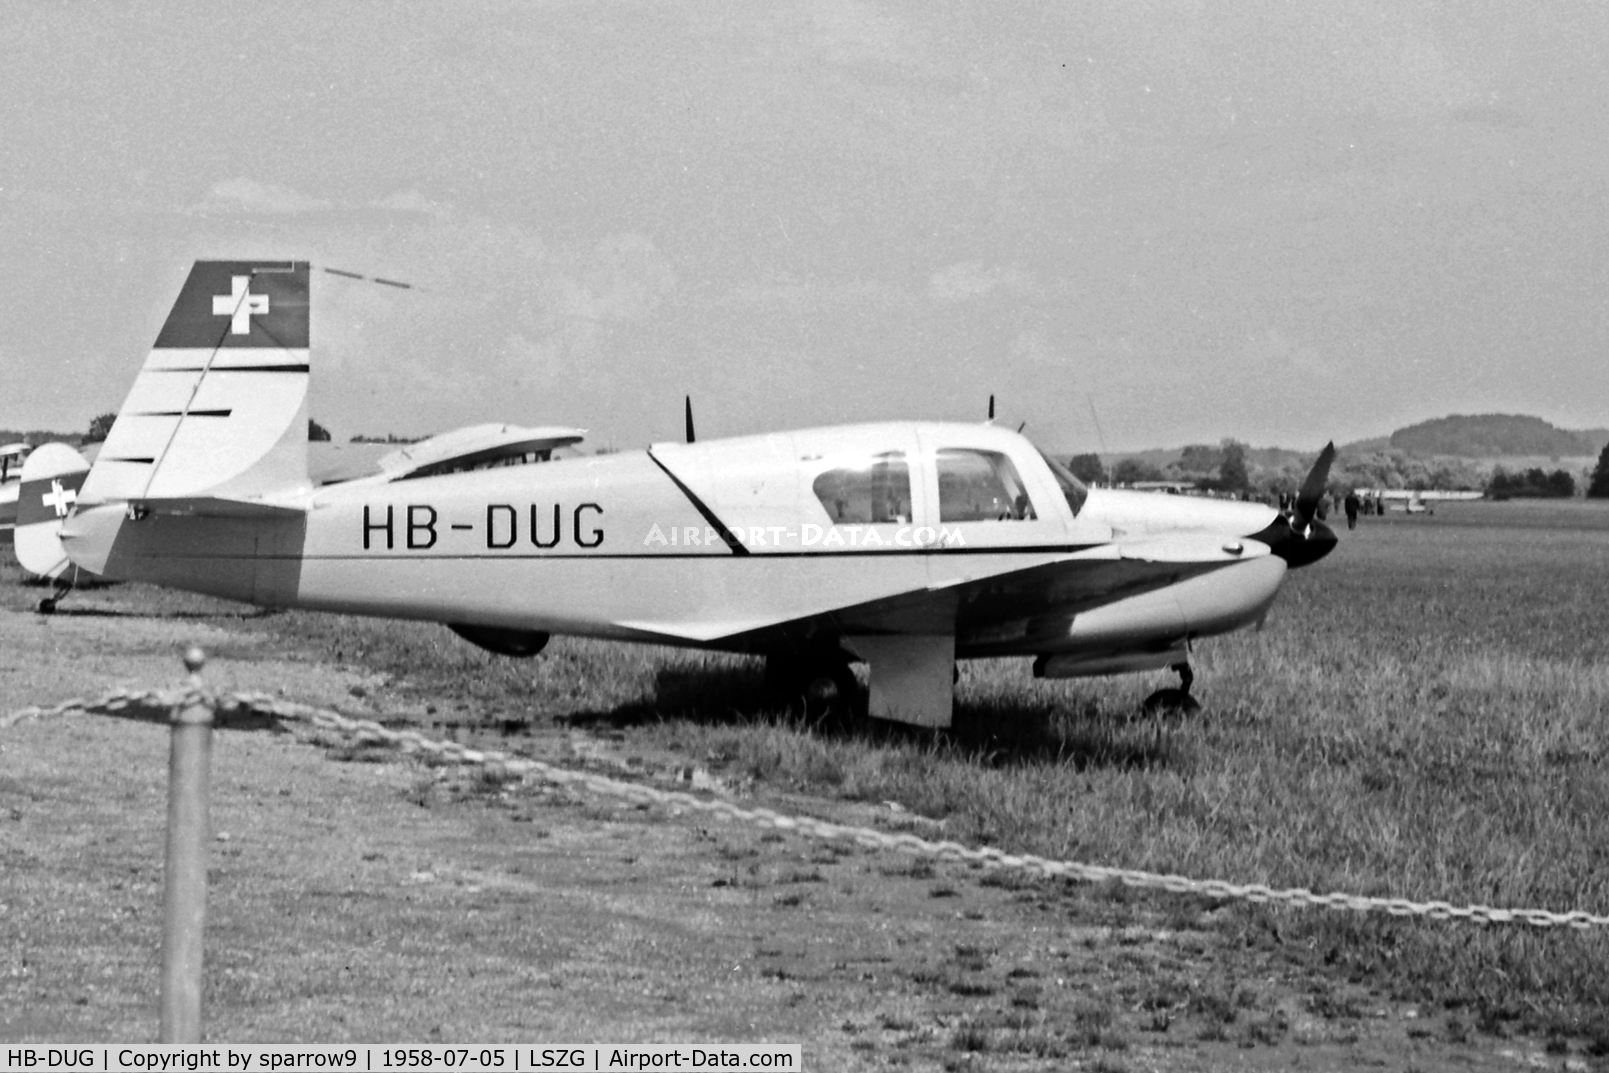 HB-DUG, 1958 Mooney M20 C/N 1194, This plane was delivered from Kerrville to Zurich via South Amerca, the South Atlantic and the African West Coast in 80h 29 min. When the photo was made 106 engine-hours were shown. Scanned from a 6x9cm b+w negative.